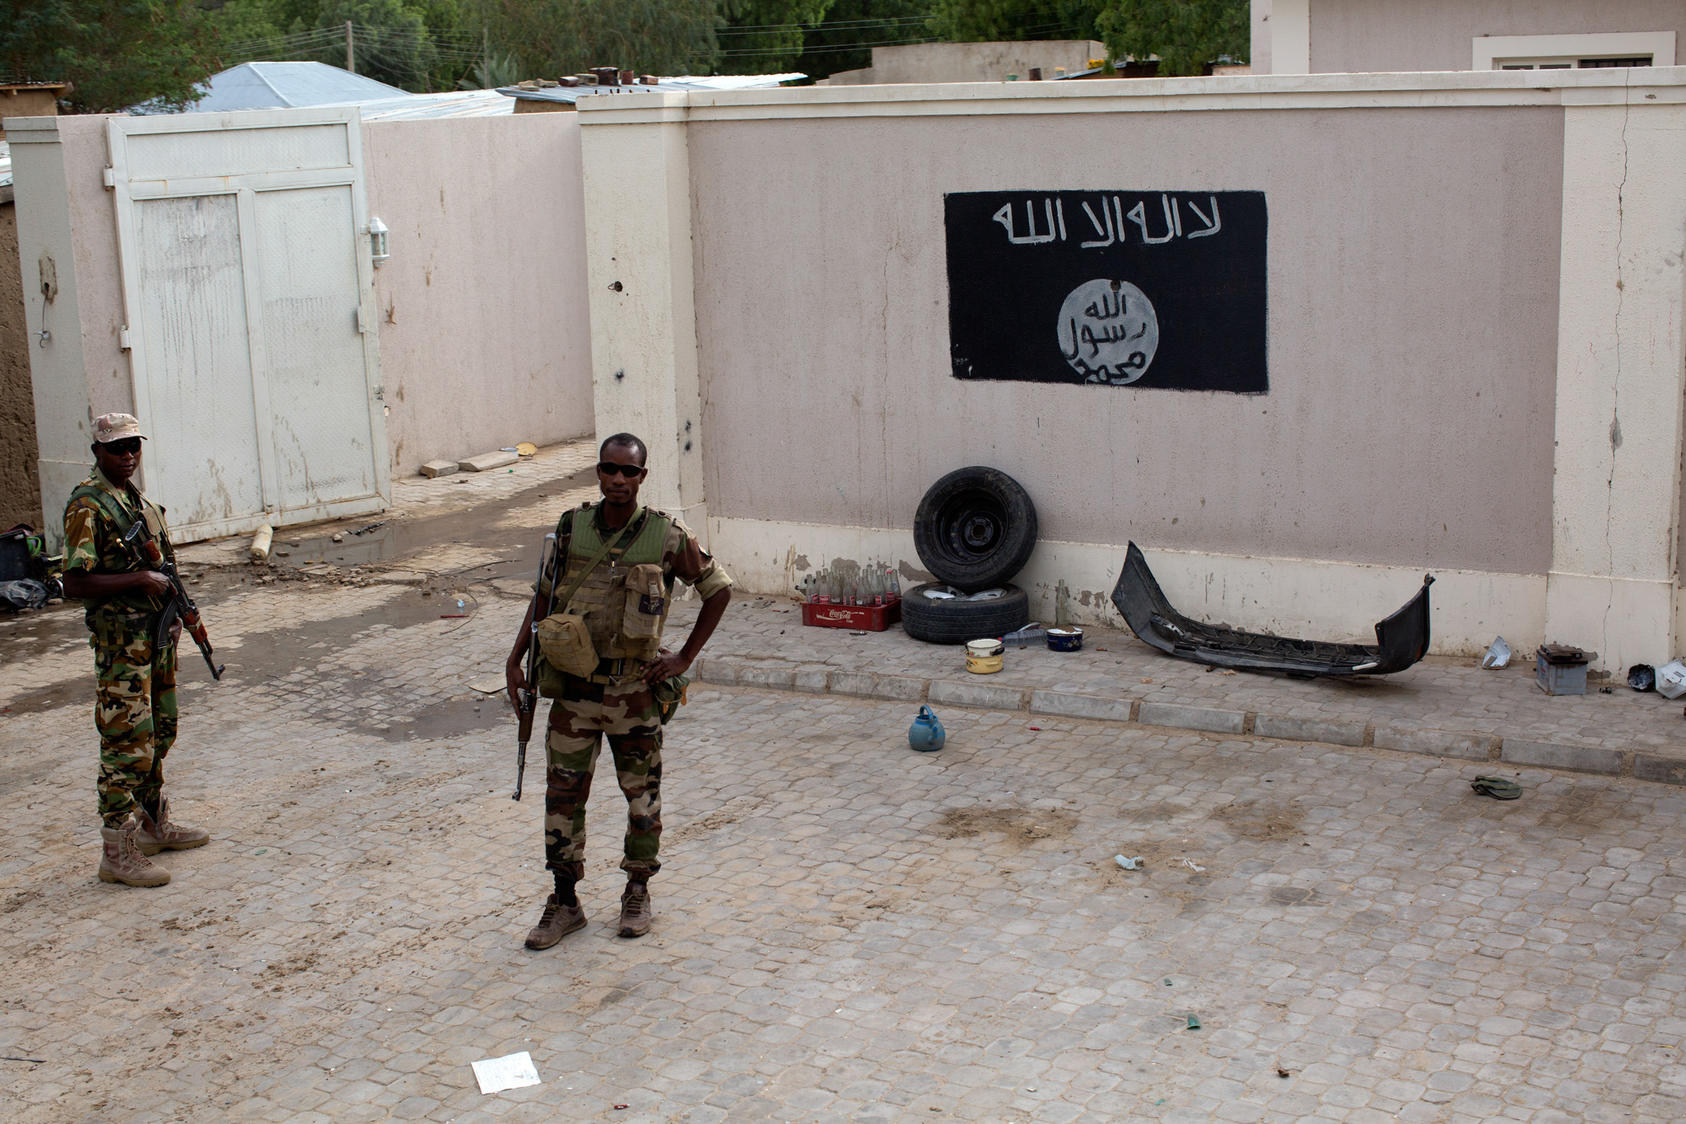 Chadian soldiers stand near a Boko Haram flag, one of many in the now-liberated — and deserted — city of Damasak, in northern Nigeria, March 18, 2015. Though the Nigerian government insists its forces have chased Boko Haram out if much of its territory, only soldiers from Chad and Niger were involved in liberating this once-thriving city of 200,000. 